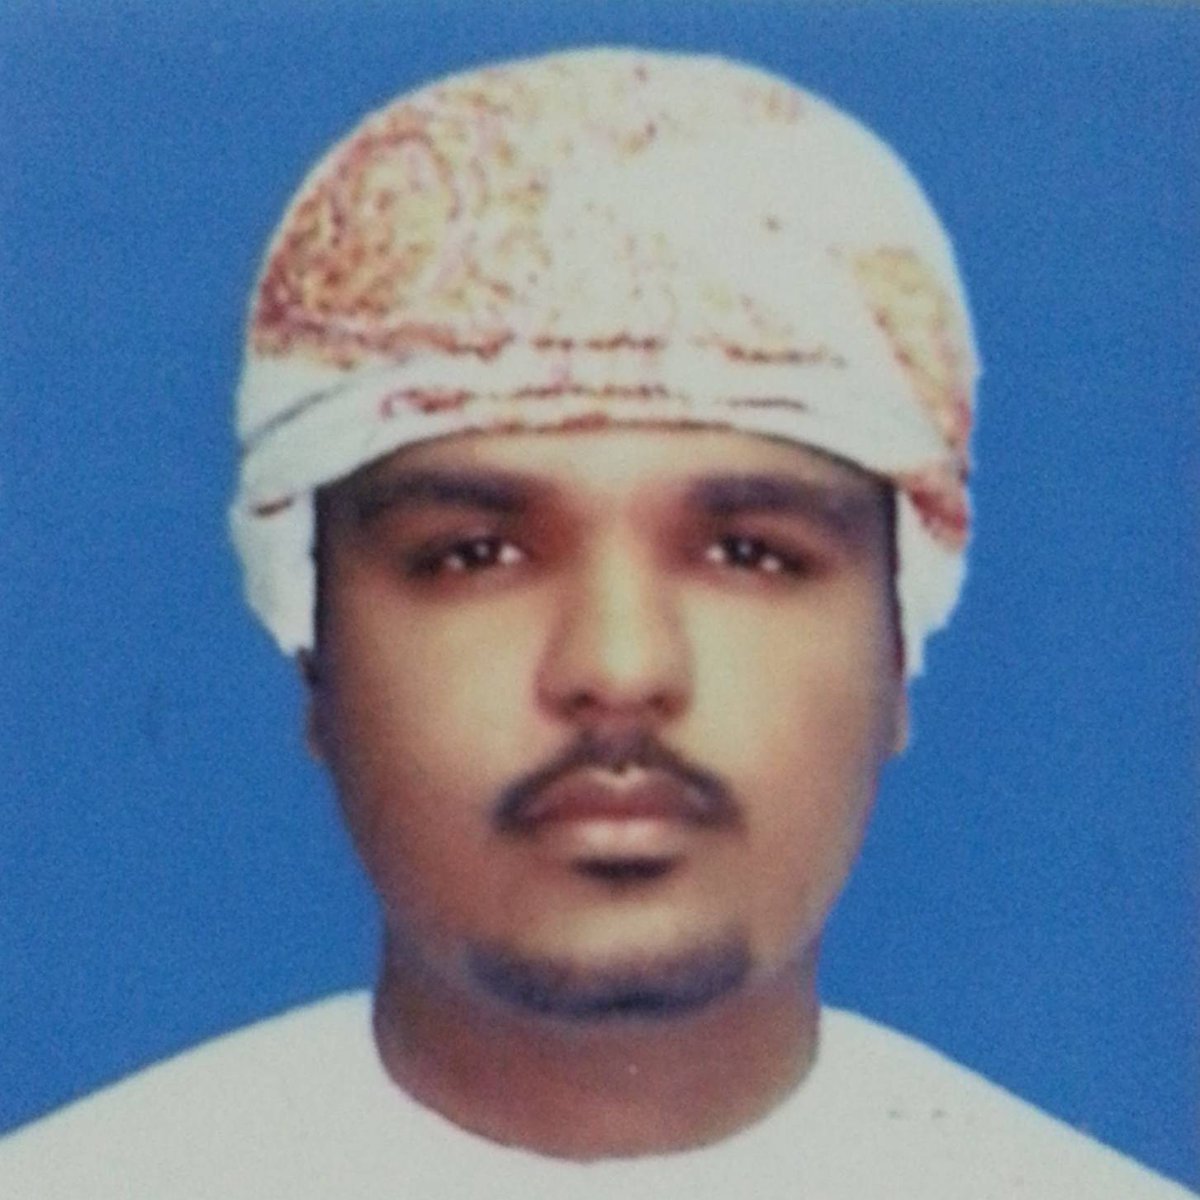 Hussain Albalushi is a local private tour guide in Muscat, Nizwa, Bahla, Sohar, Sur (Oman), zurl.co/wkn0
#tourguides #PrivateGuideWorld #tour #privatetourguide #localtours #tourguide #privatetour #localtourguide #sightseeing